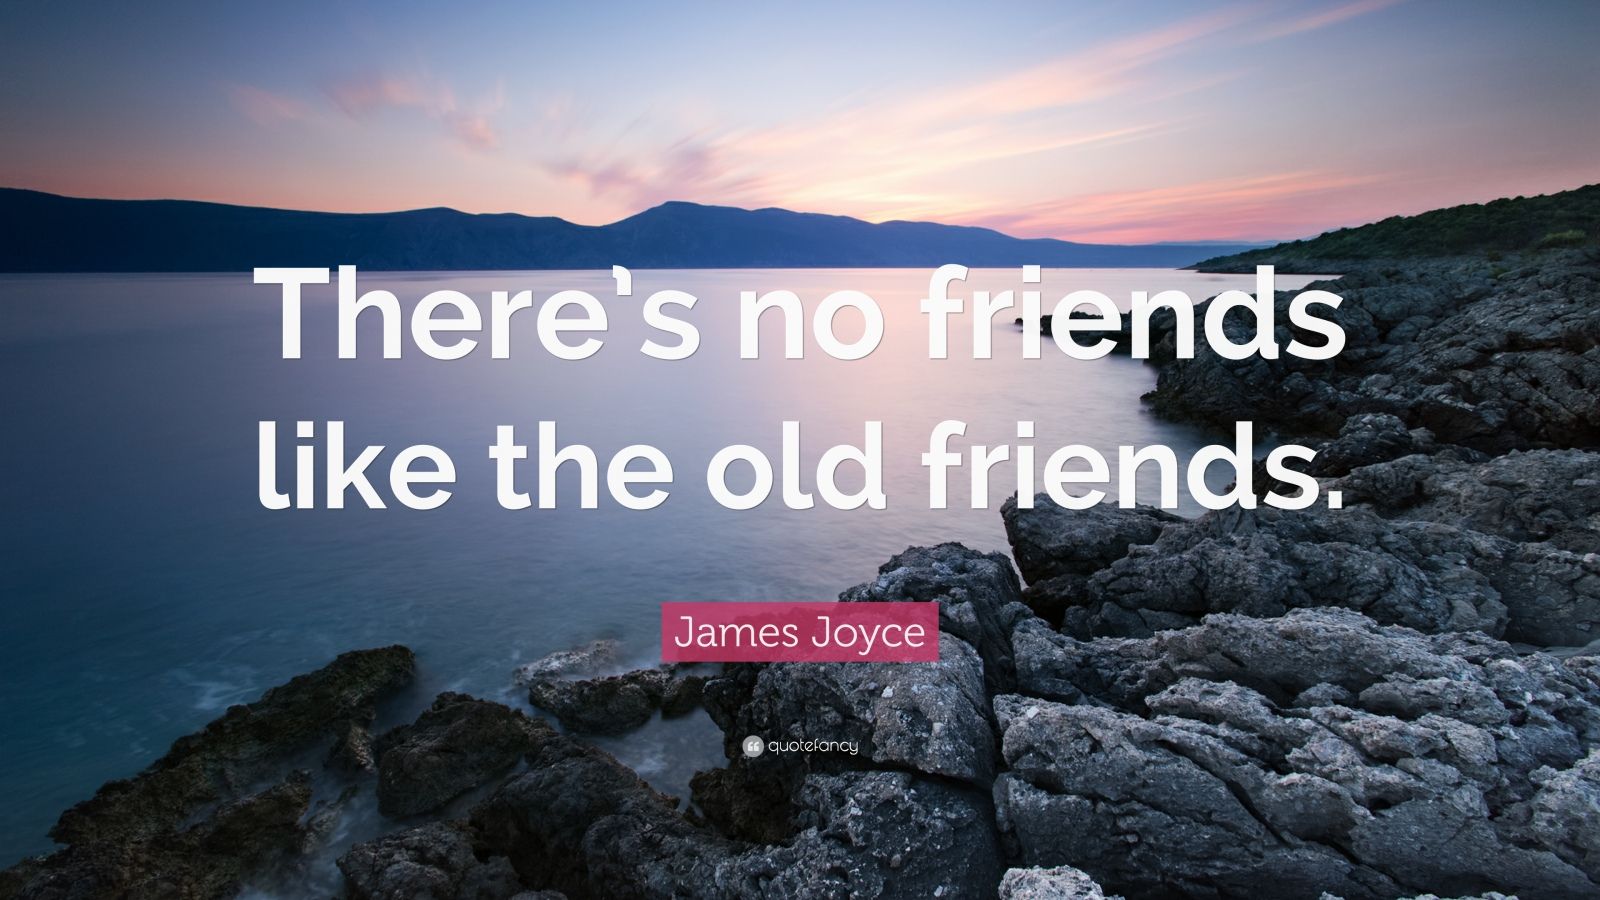 James Joyce Quote: “There's no friends like the old friends.”